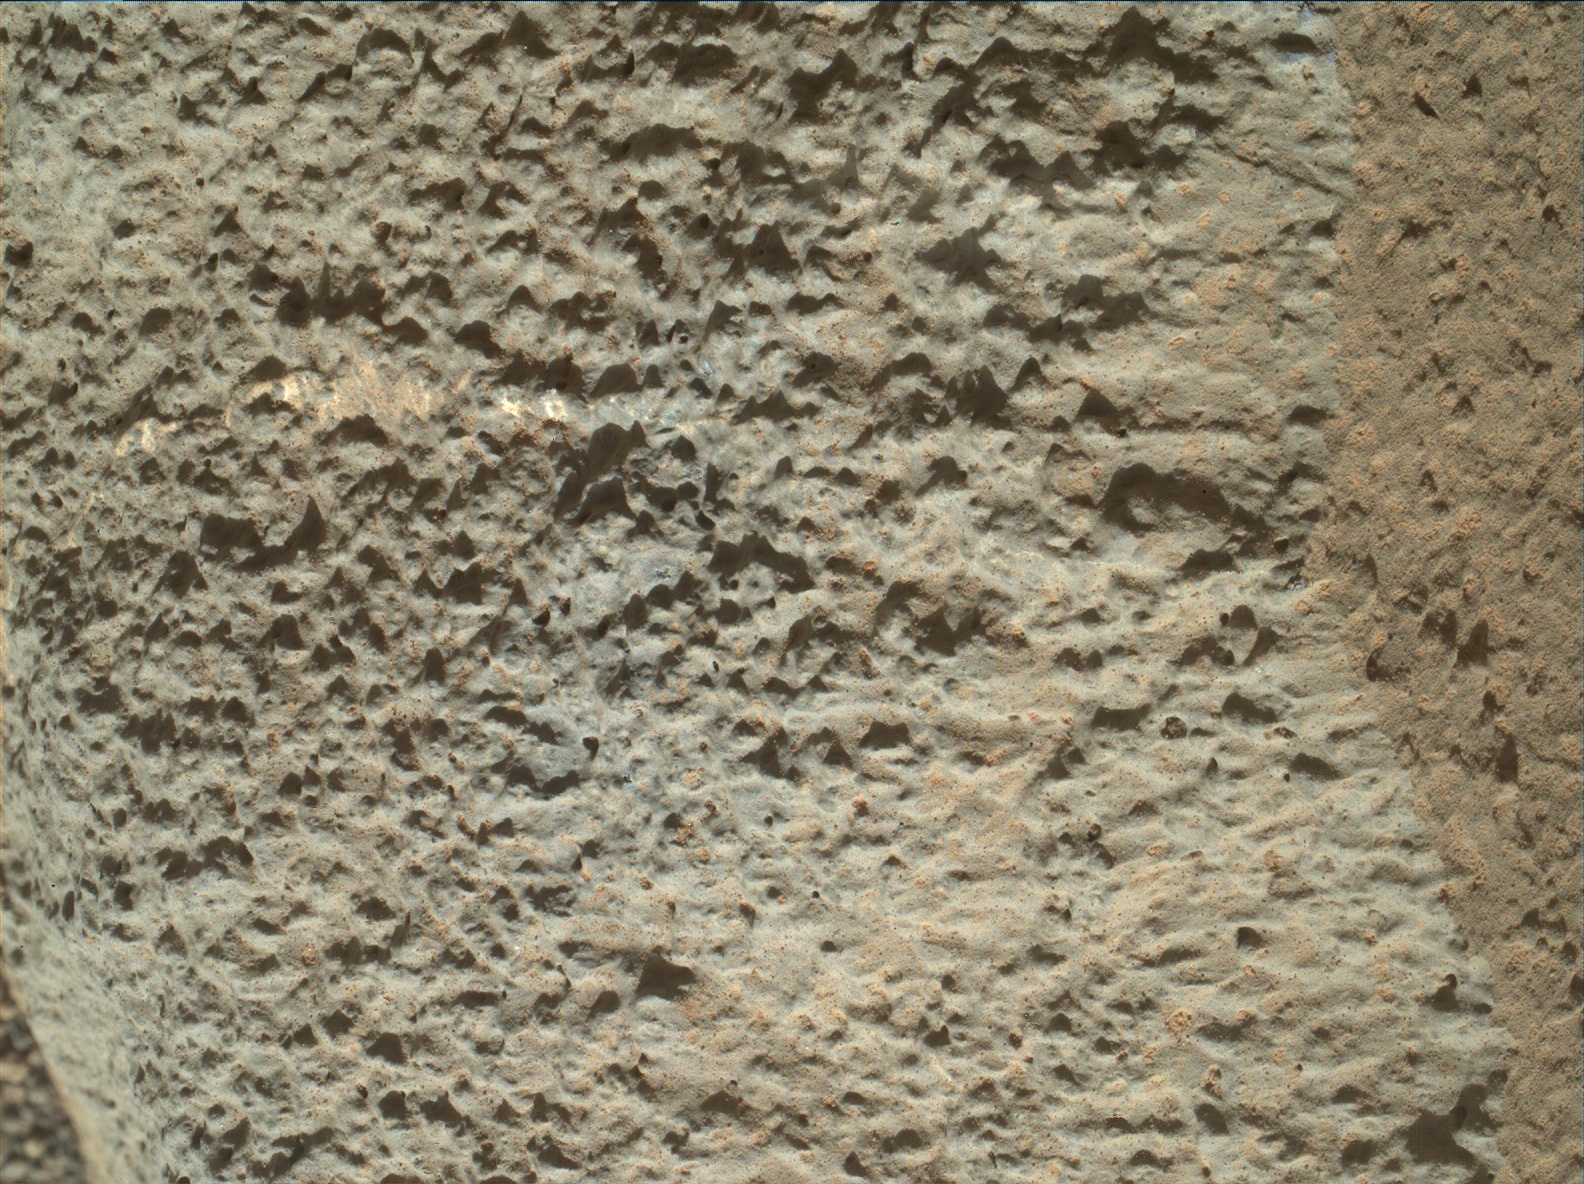 Nasa's Mars rover Curiosity acquired this image using its Mars Hand Lens Imager (MAHLI) on Sol 1273